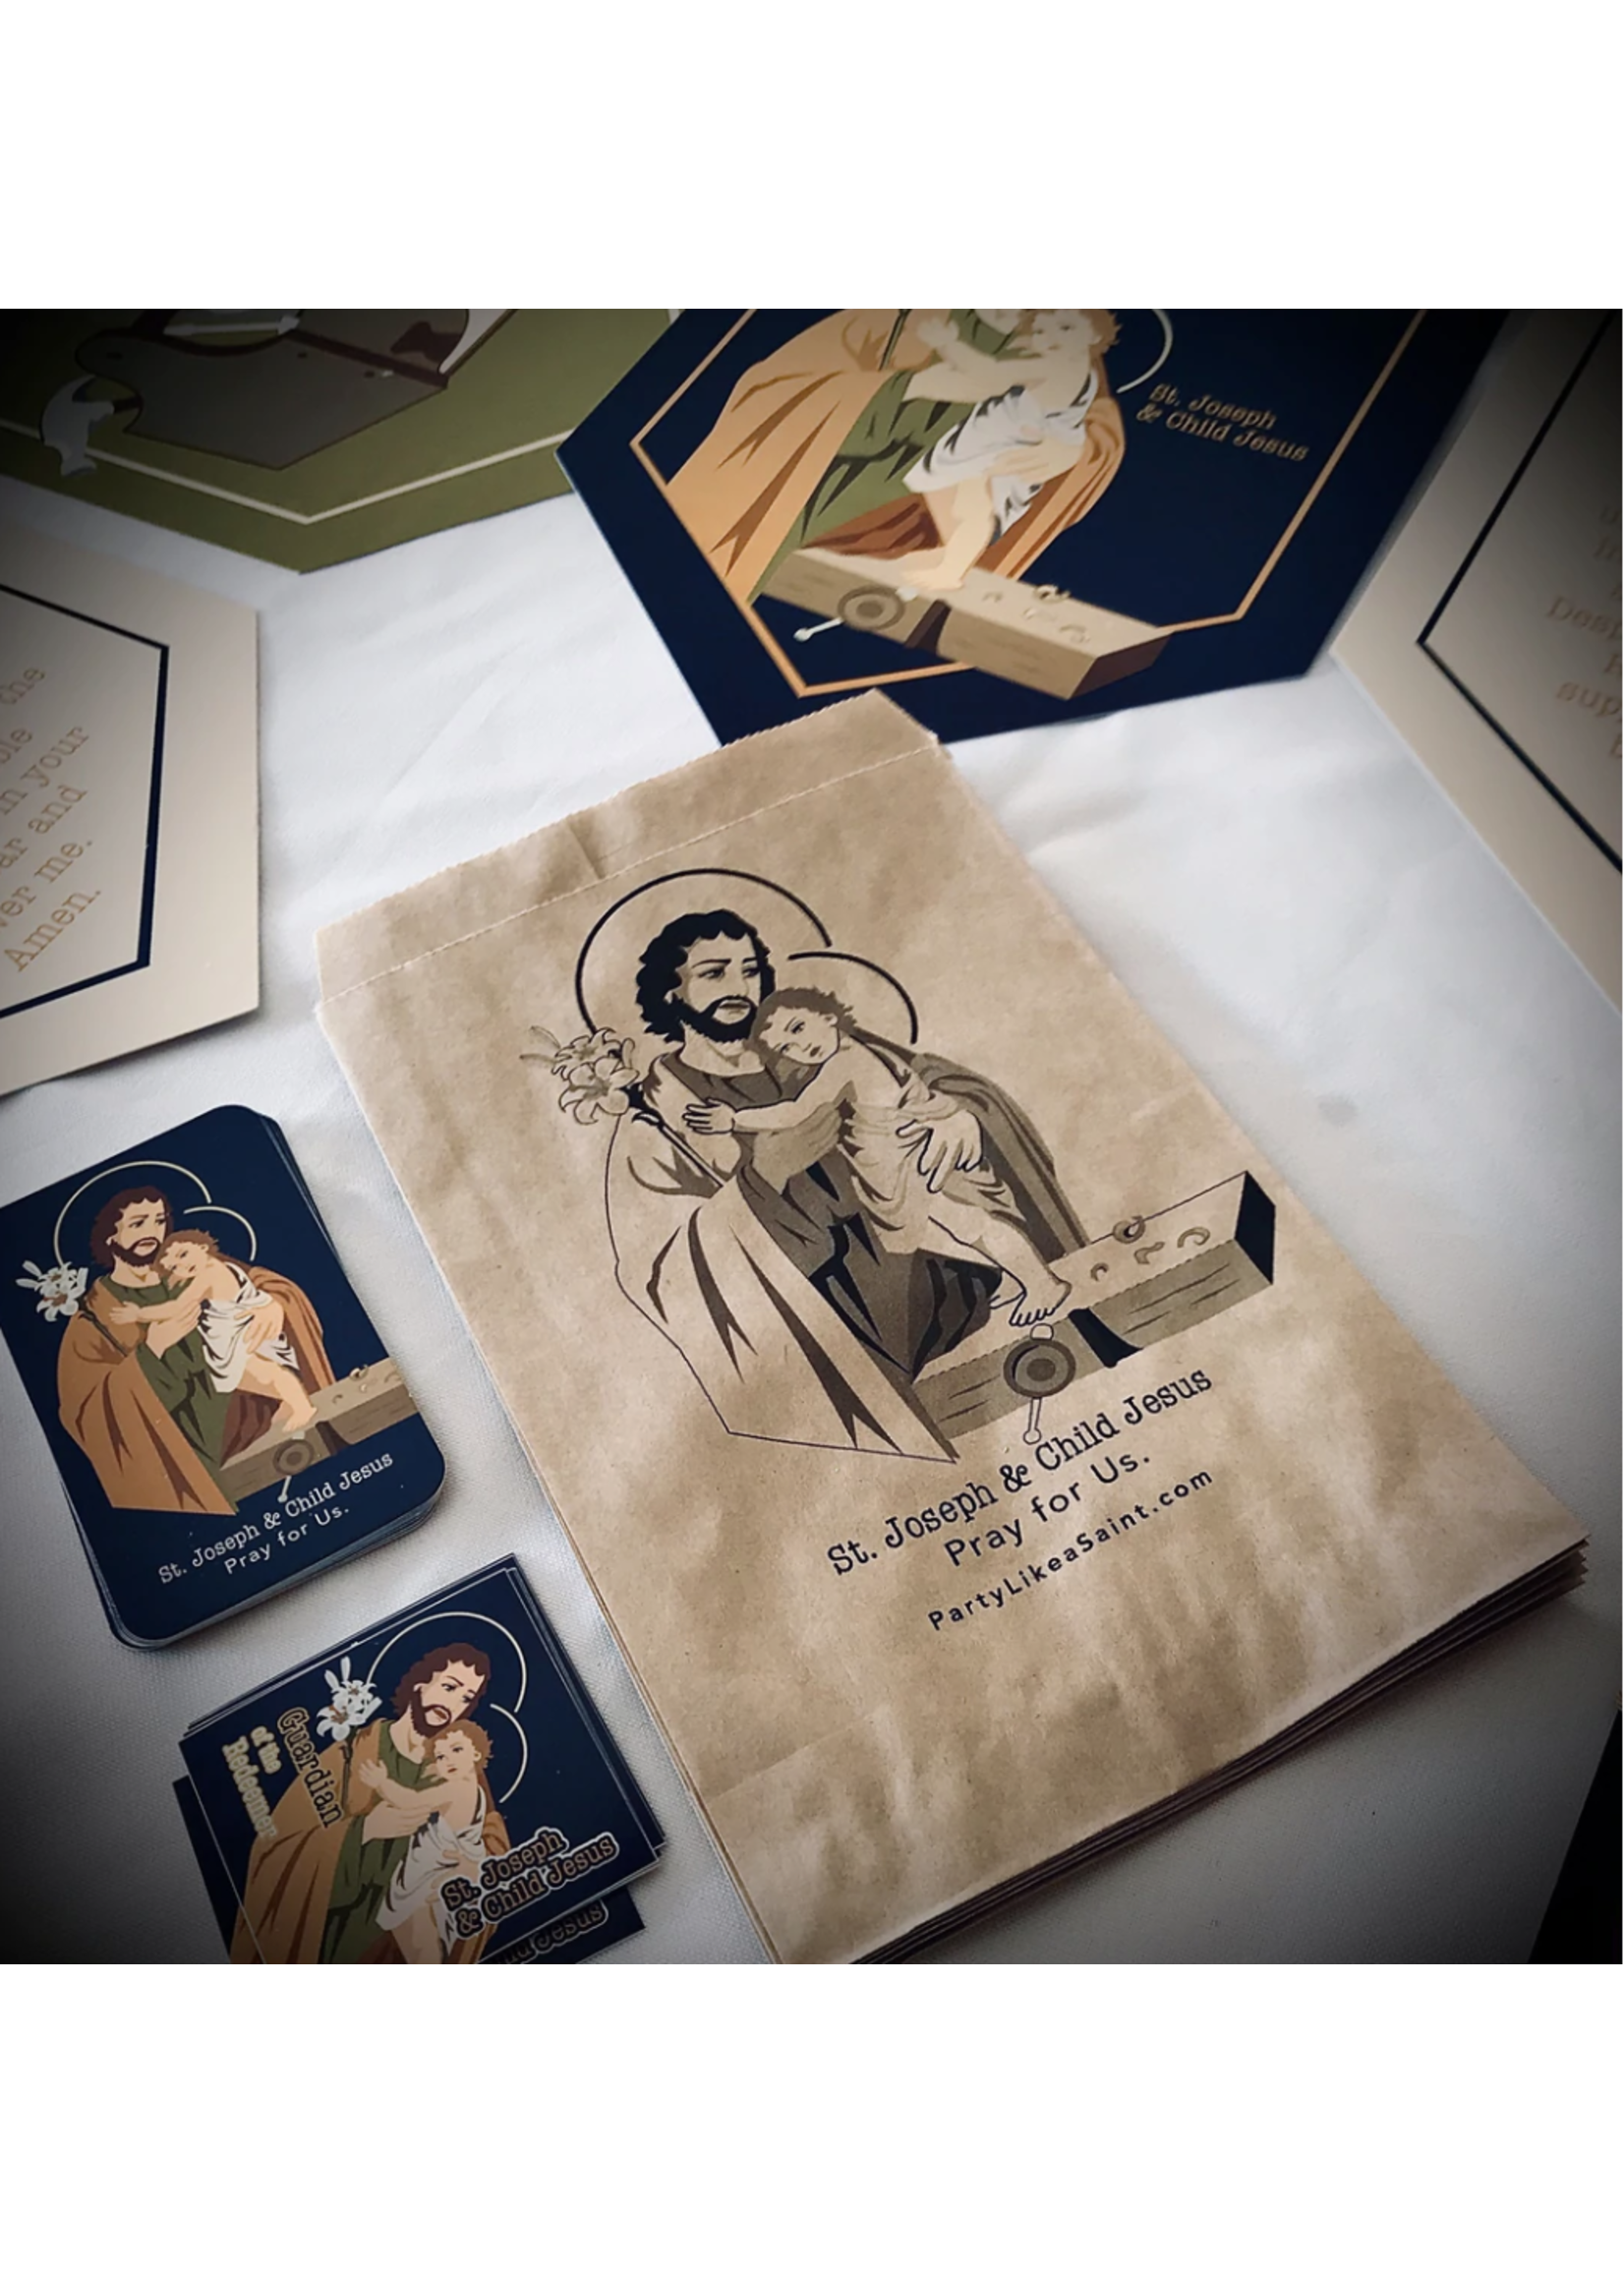 Party like a Saint St Joseph Occasion-specific party packages